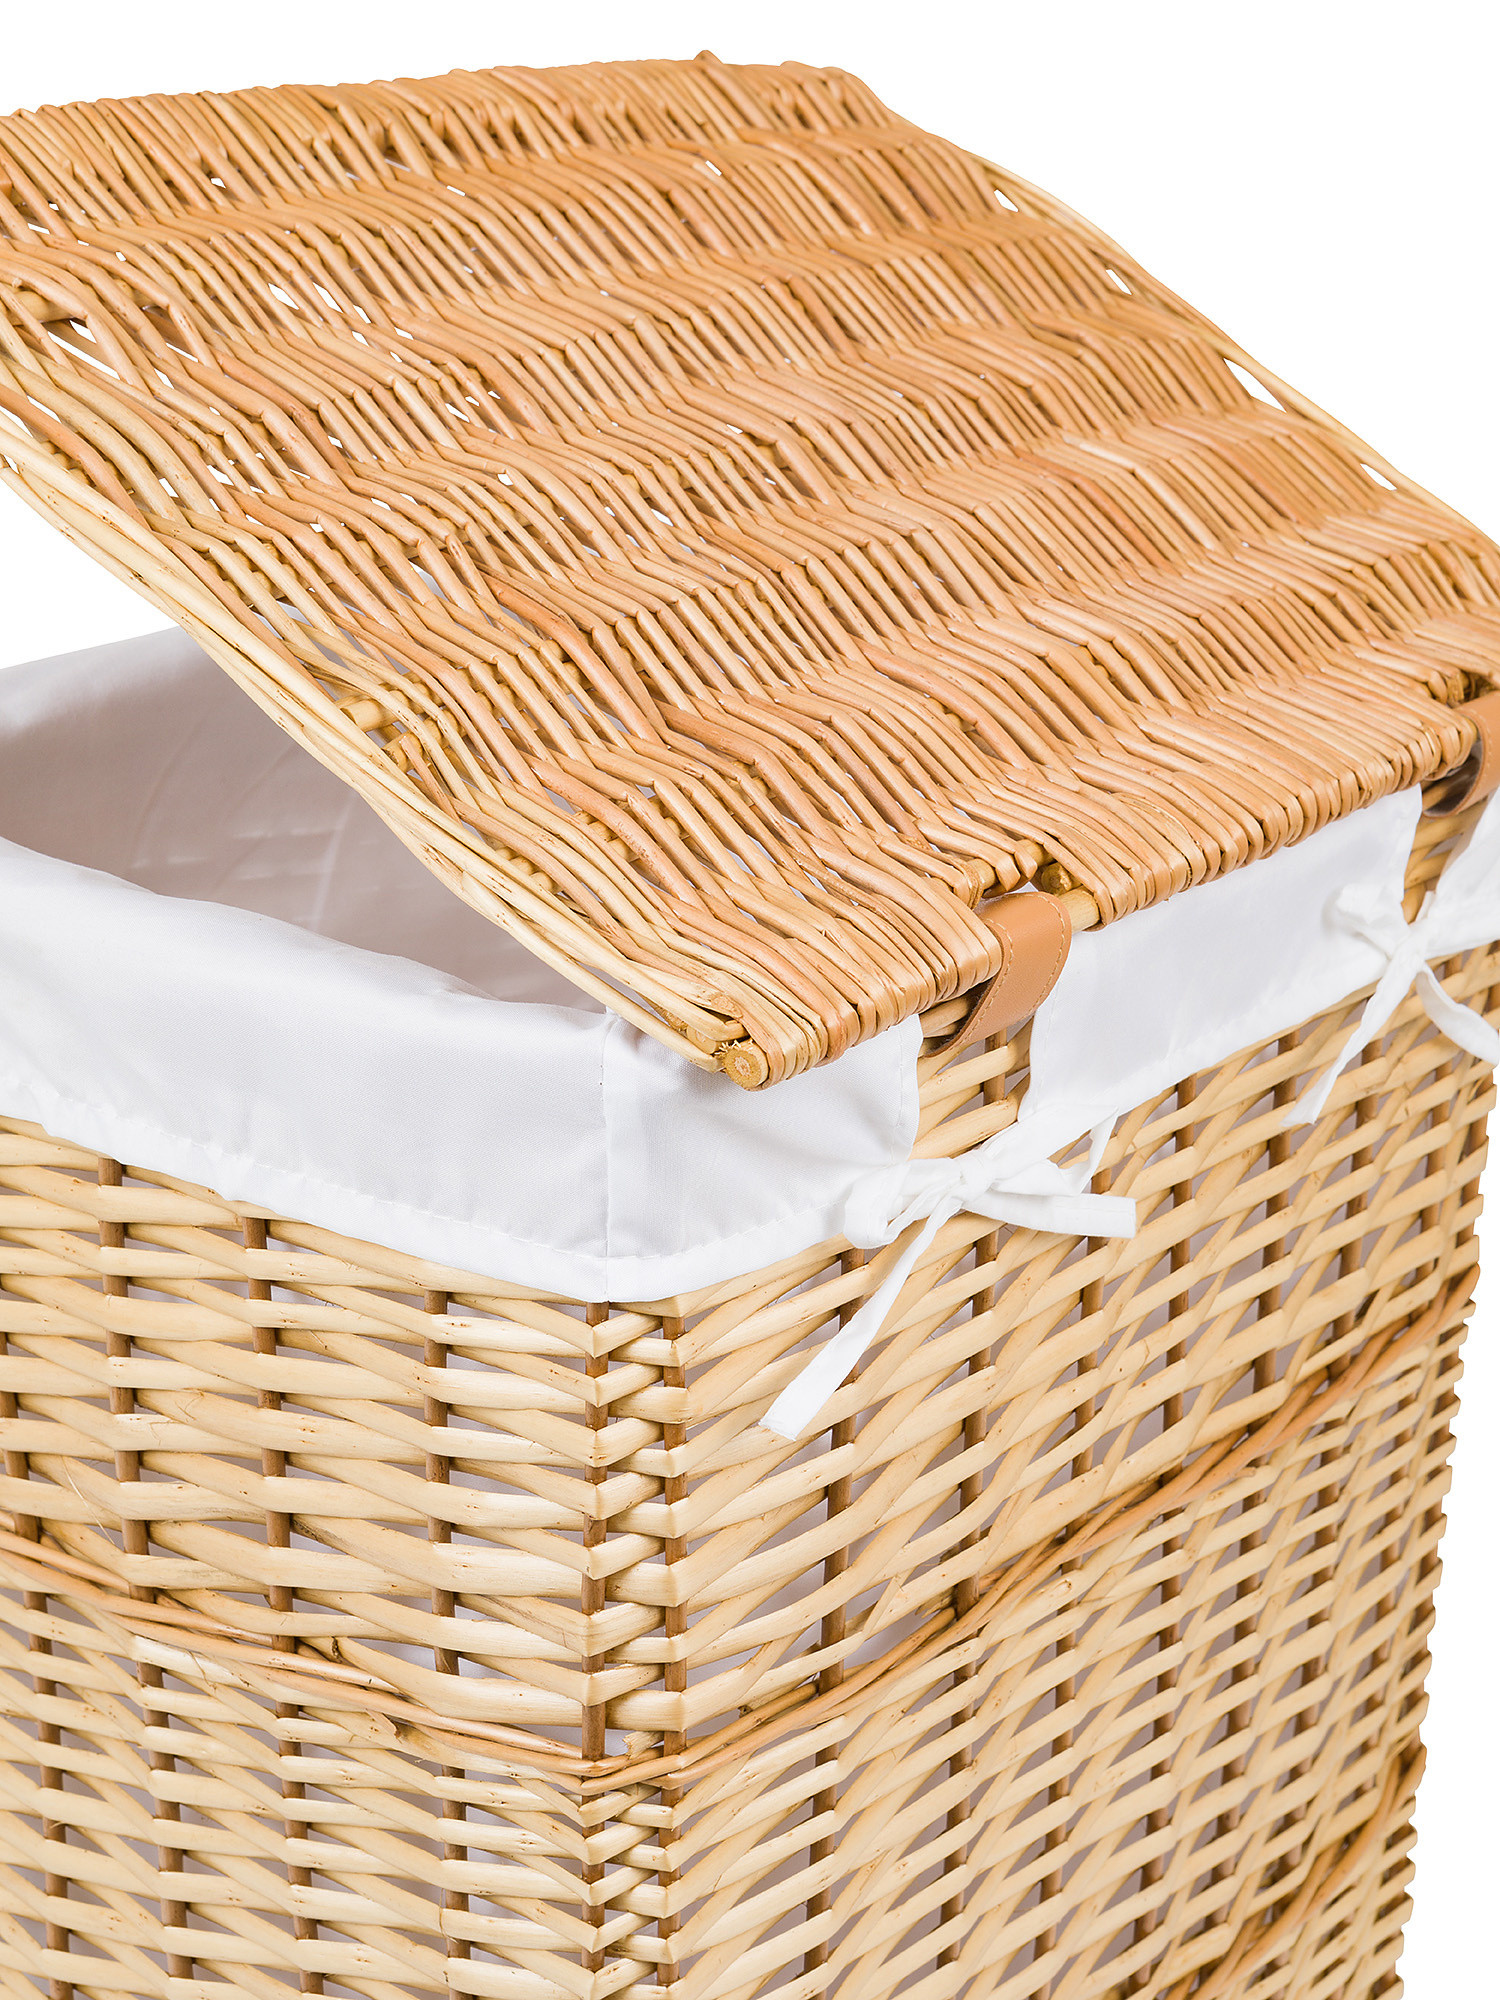 Wicker laundry basket with lining, Natural, large image number 1